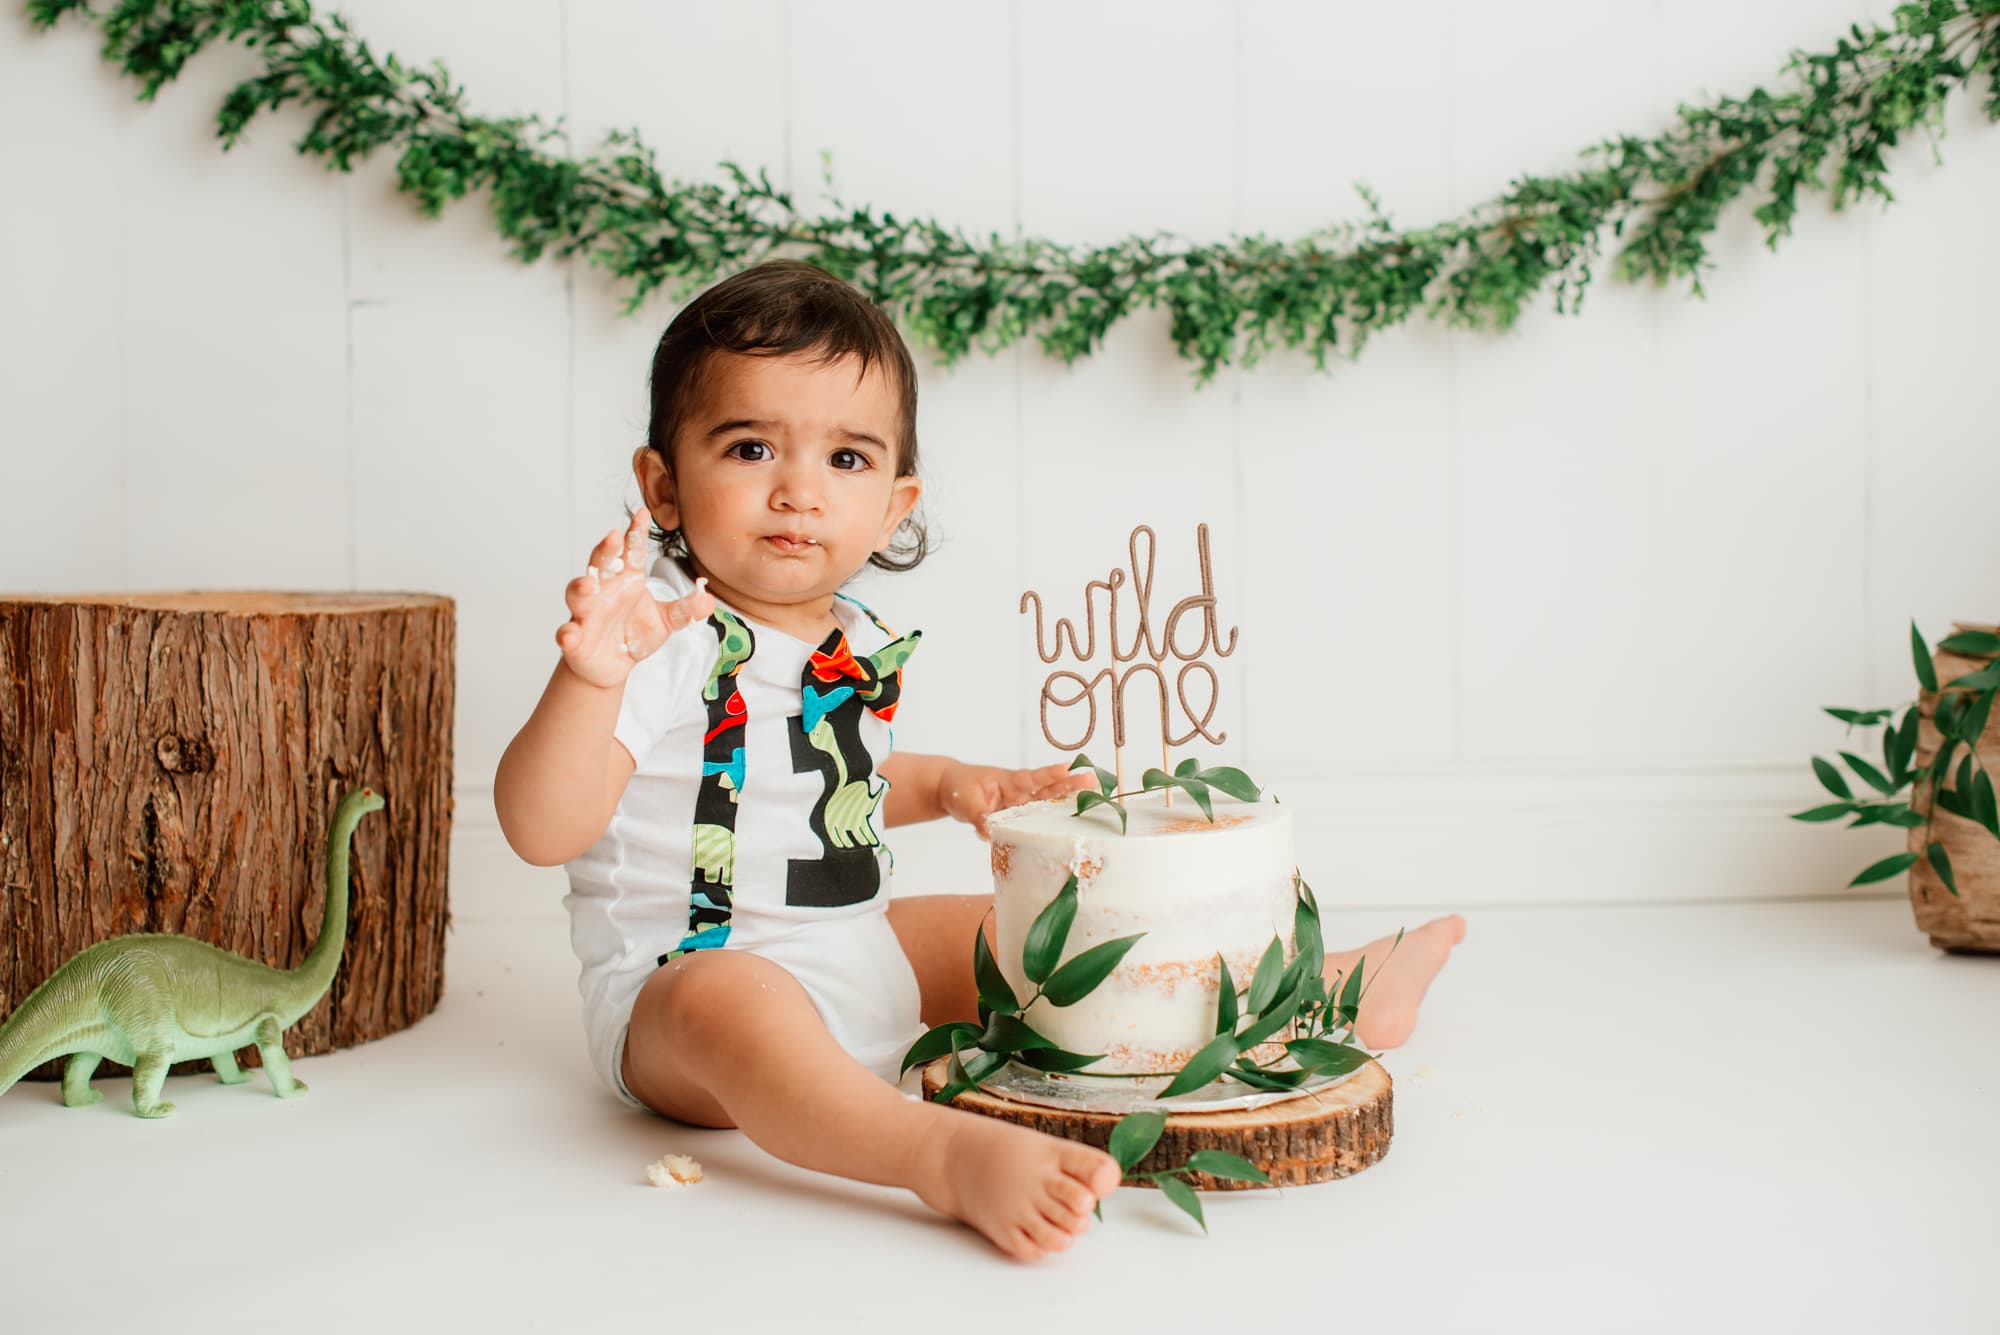 Cake Smash with a Dinosaurs and Wild One theme in a white Vancouver studio.